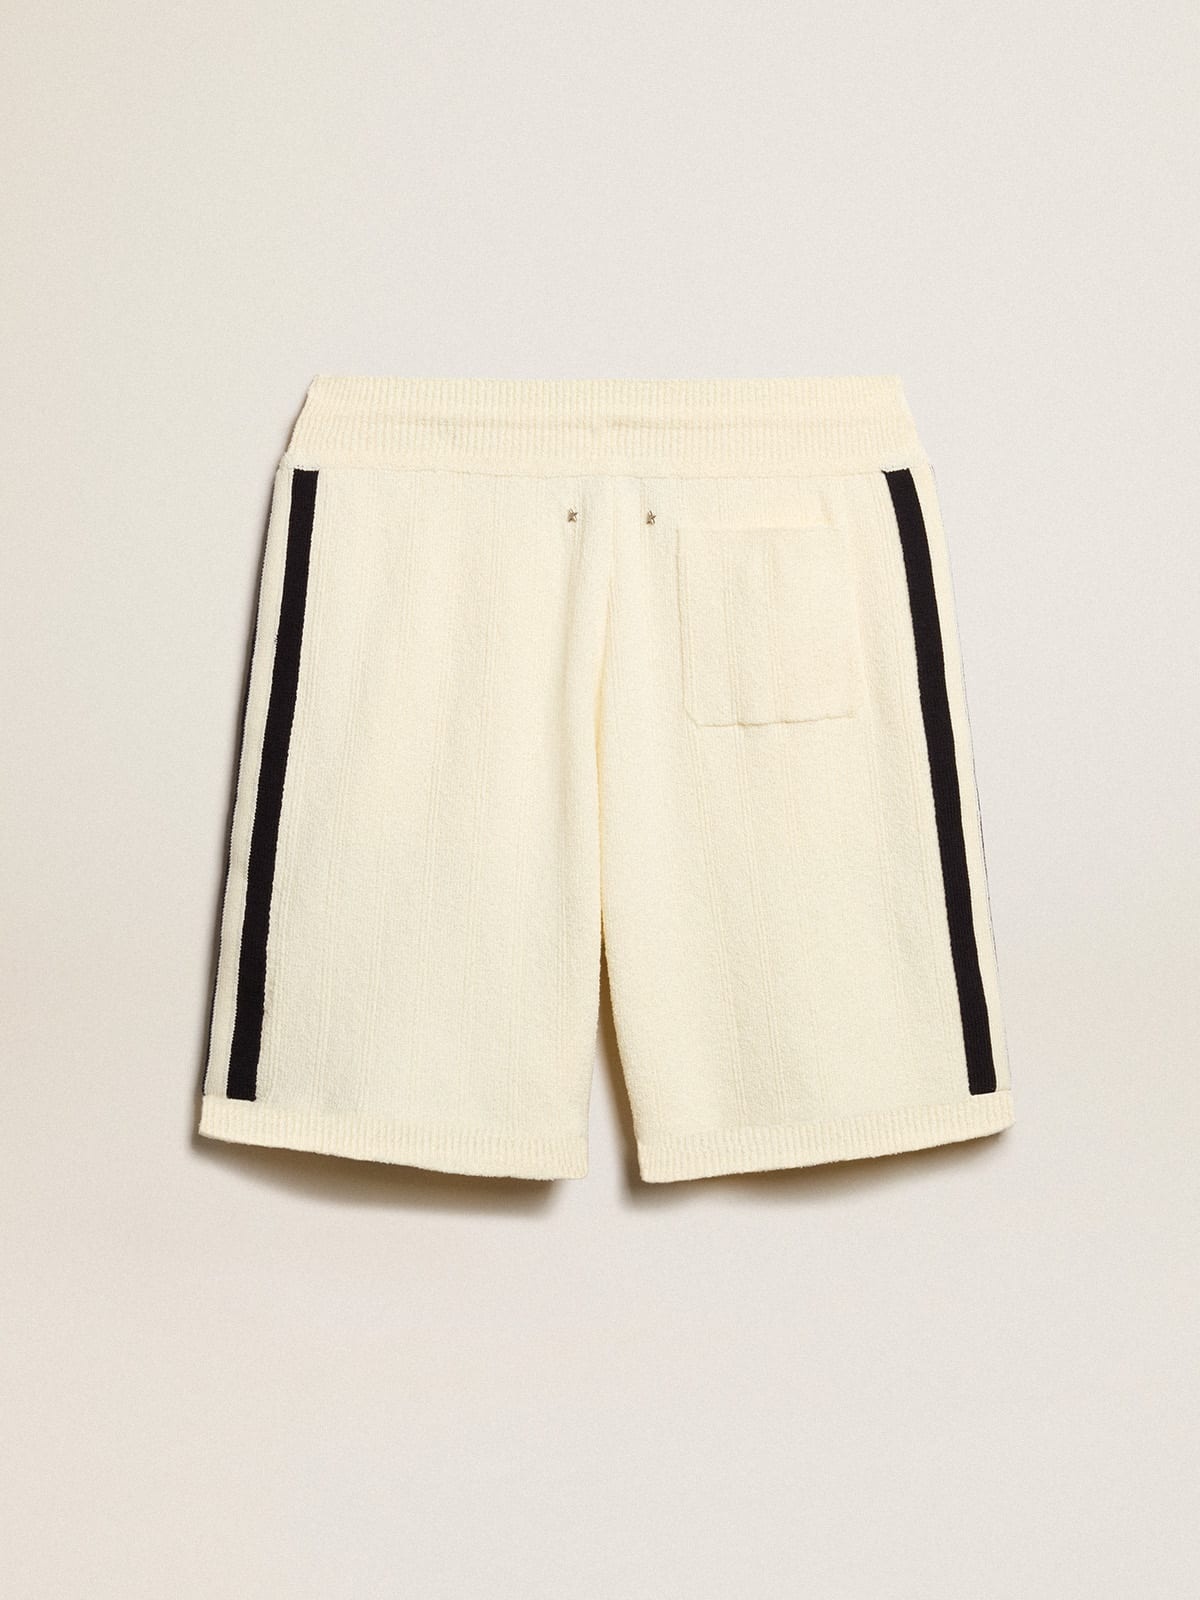 Men's vintage white shorts with blue rib knit on the sides - 5